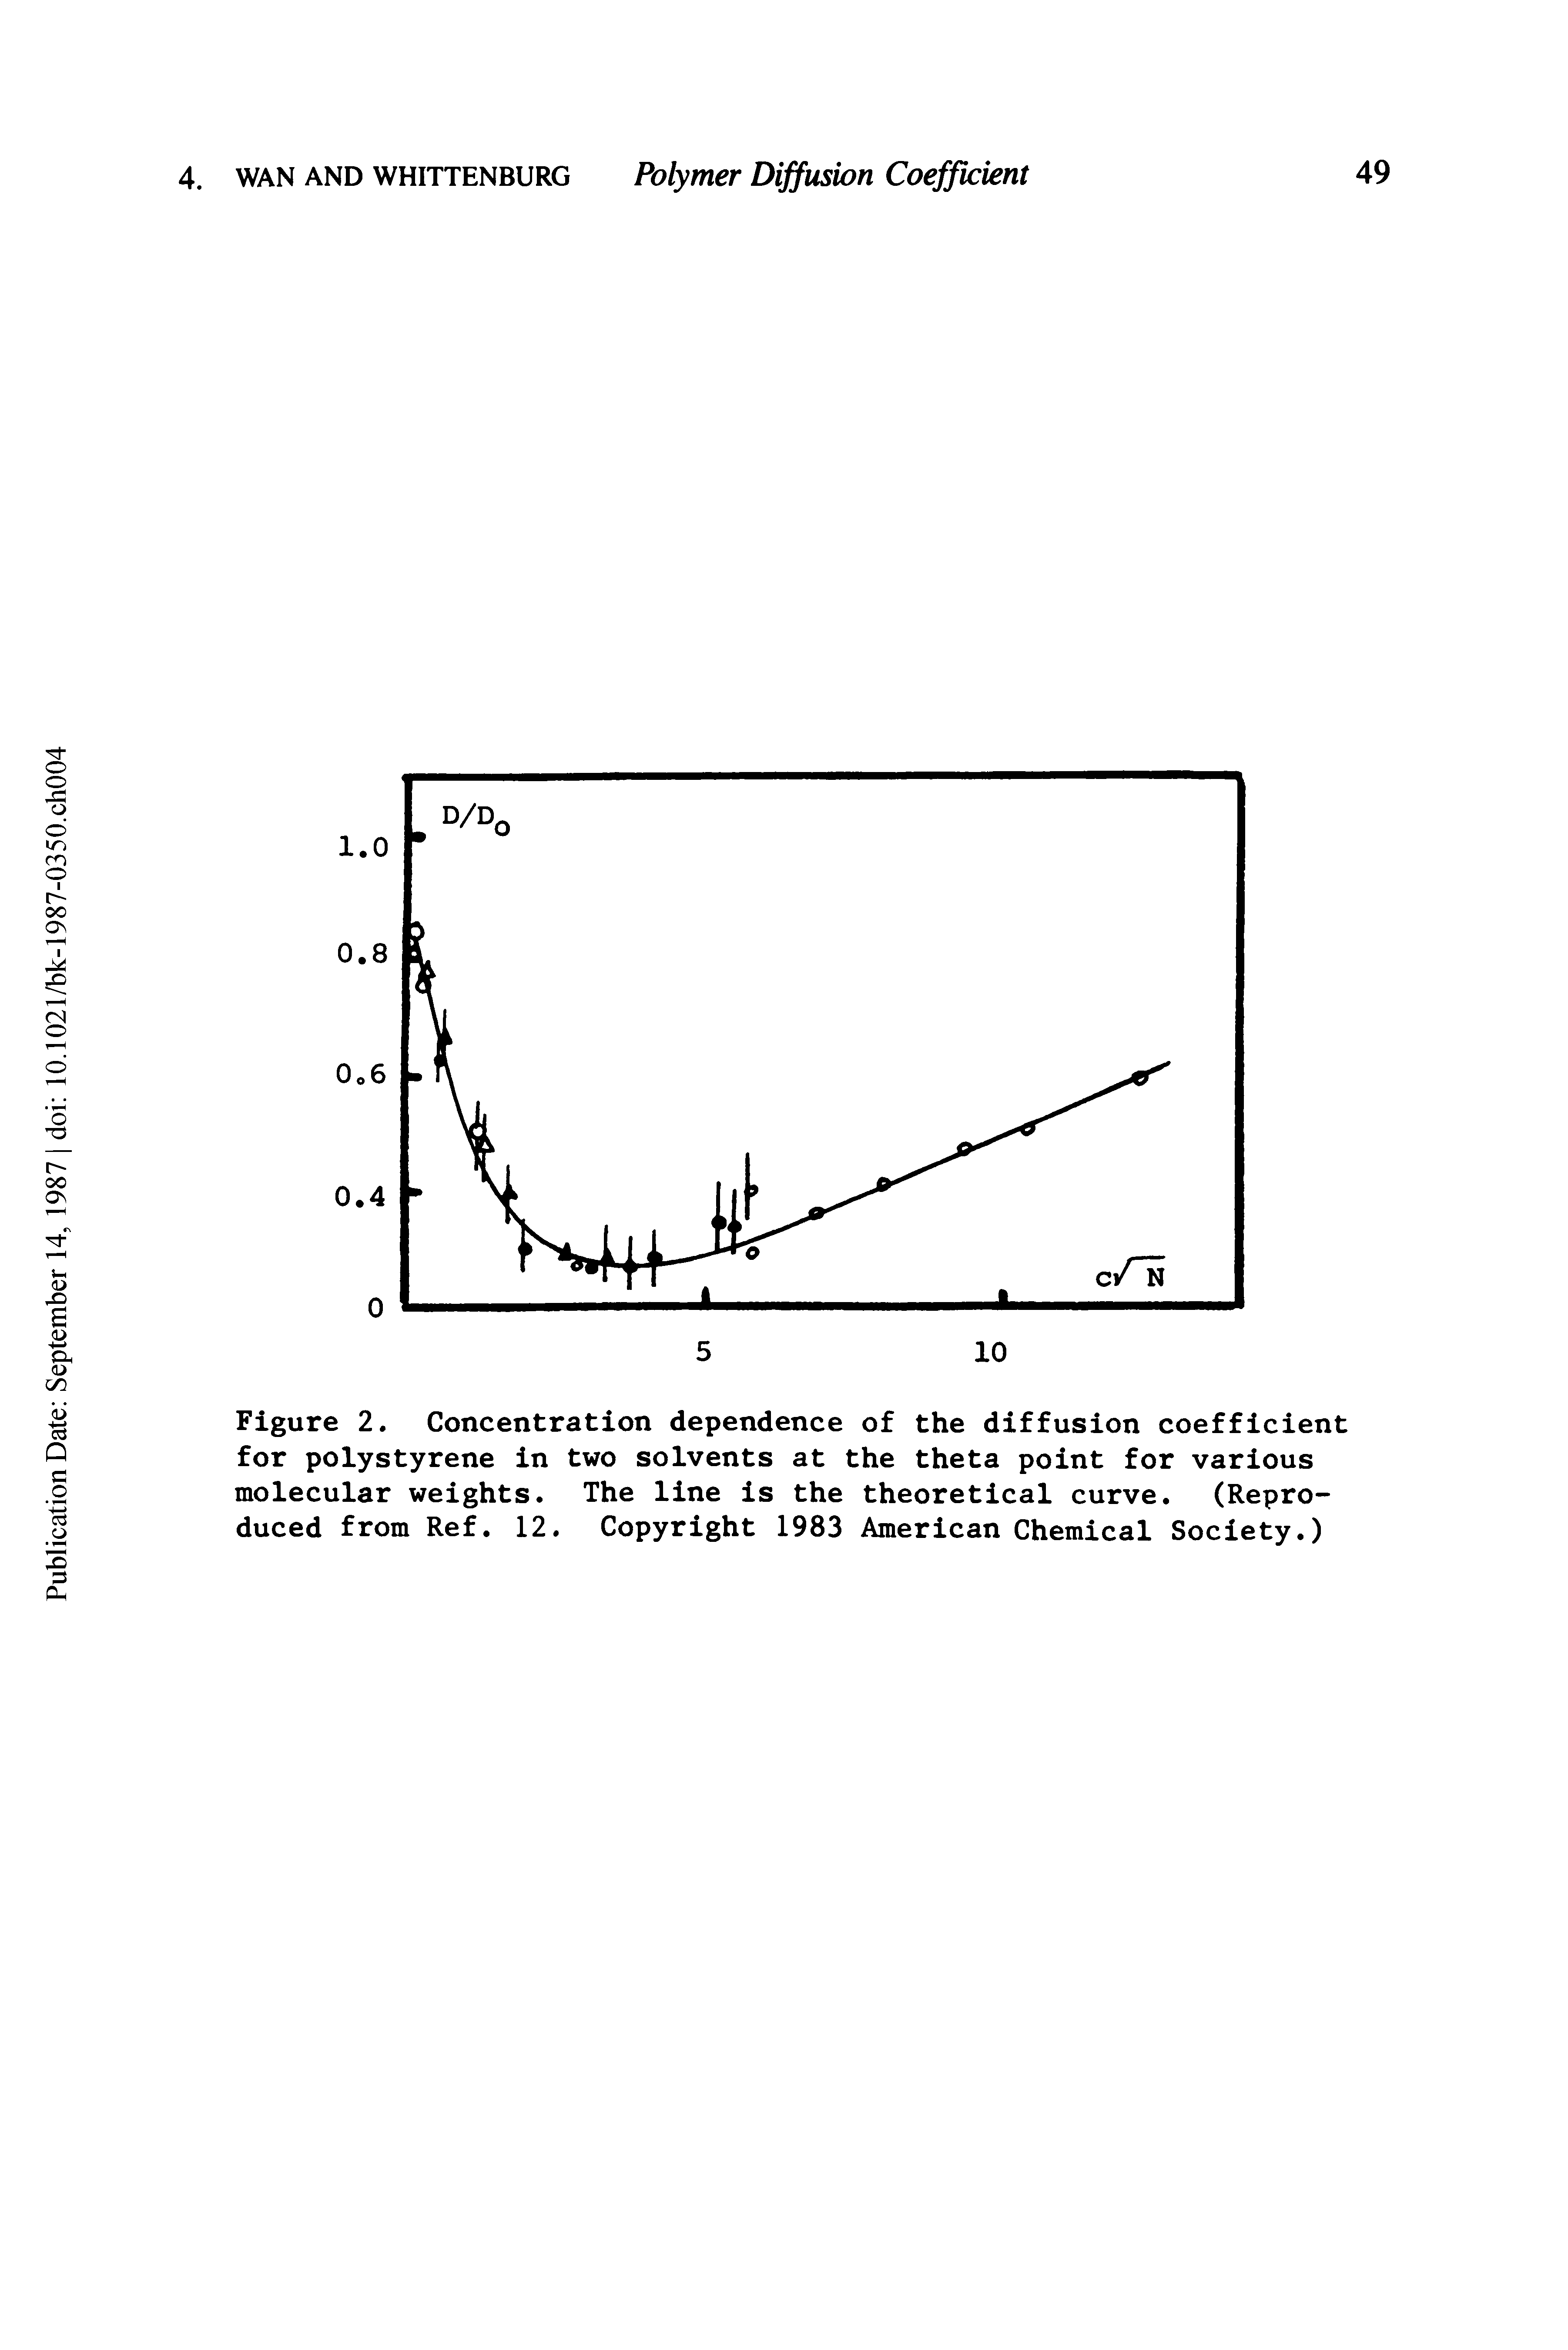 Figure 2. Concentration dependence of the diffusion coefficient for polystyrene in two solvents at the theta point for various molecular weights. The line is the theoretical curve. (Reproduced from Ref. 12. Copyright 1983 American Chemical Society.)...